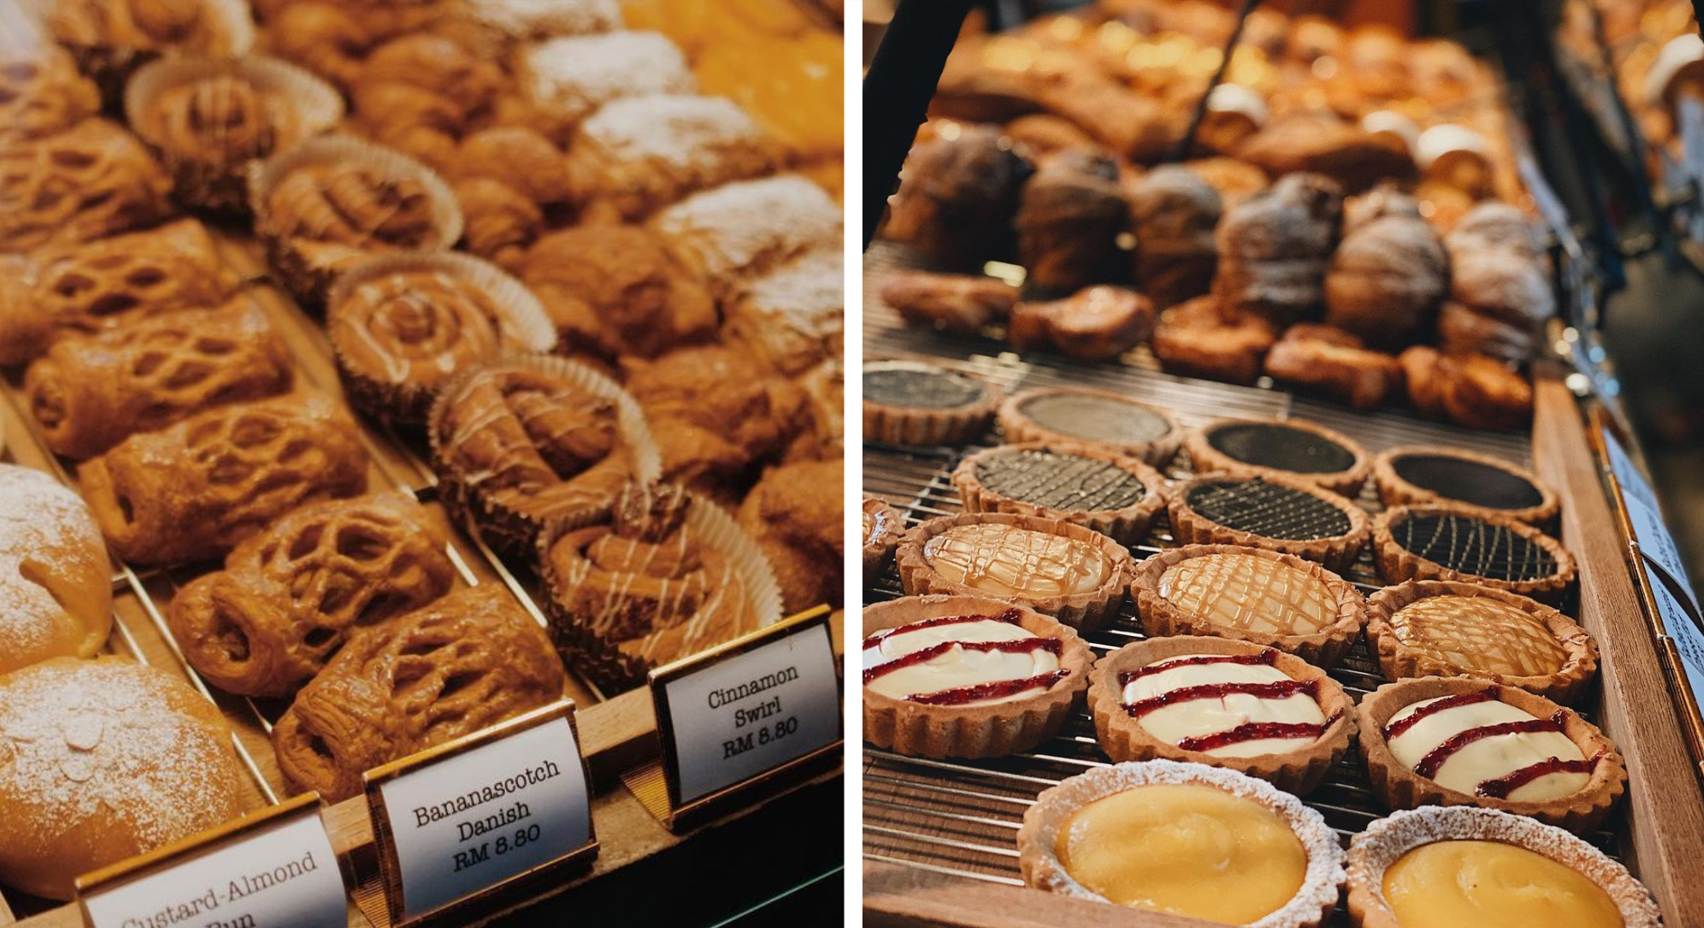 Bakeries in KL and PJ - The Bread Shop